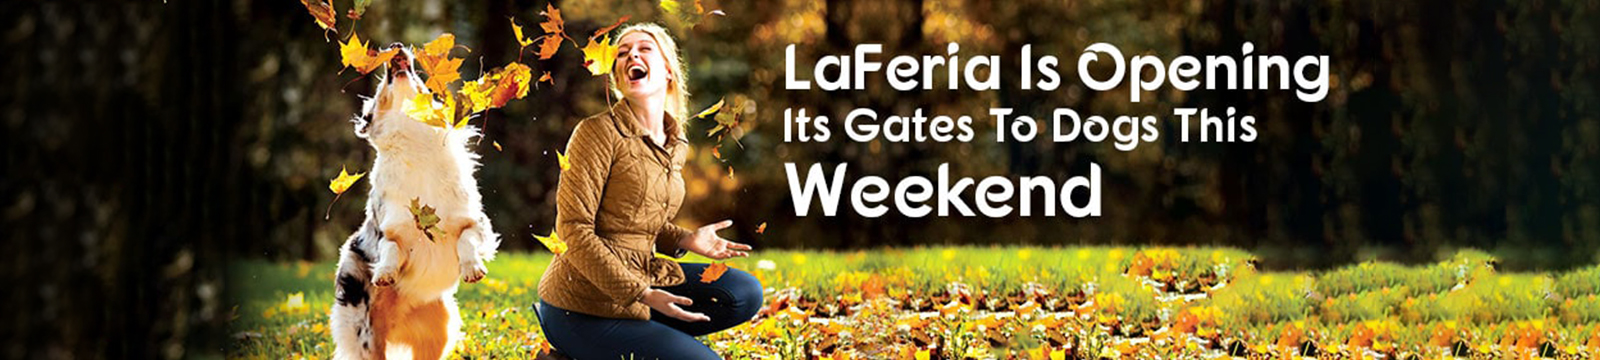 LaFeria Is Opening Its Gates To Dogs This Weekend!